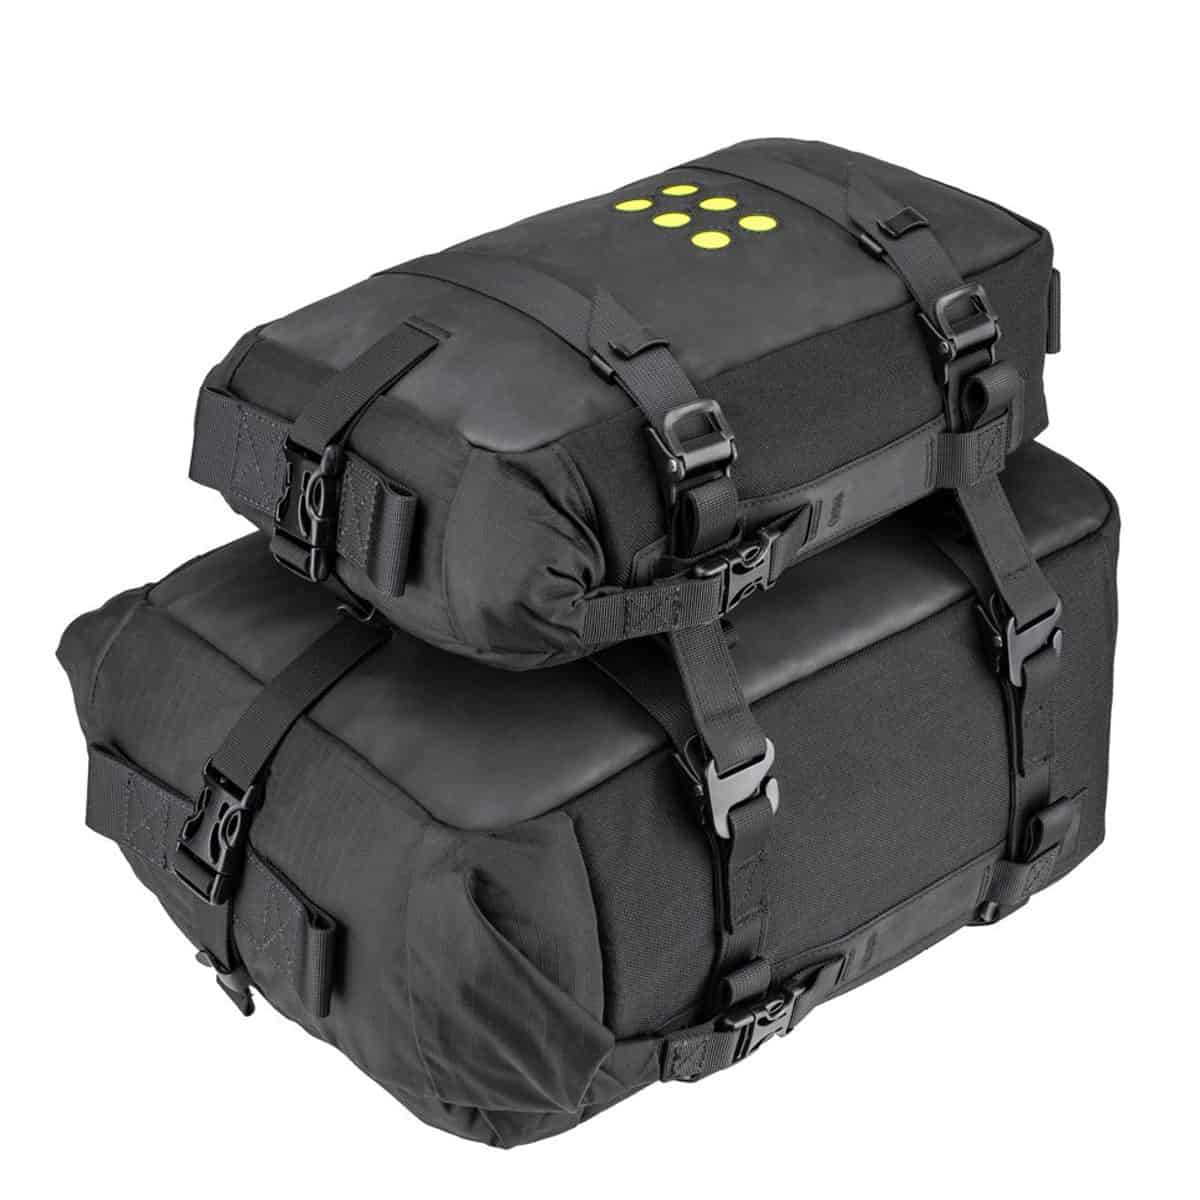 Kriega Overlander-S OS Packs: Serious luggage for serious adventures 6L with 18L